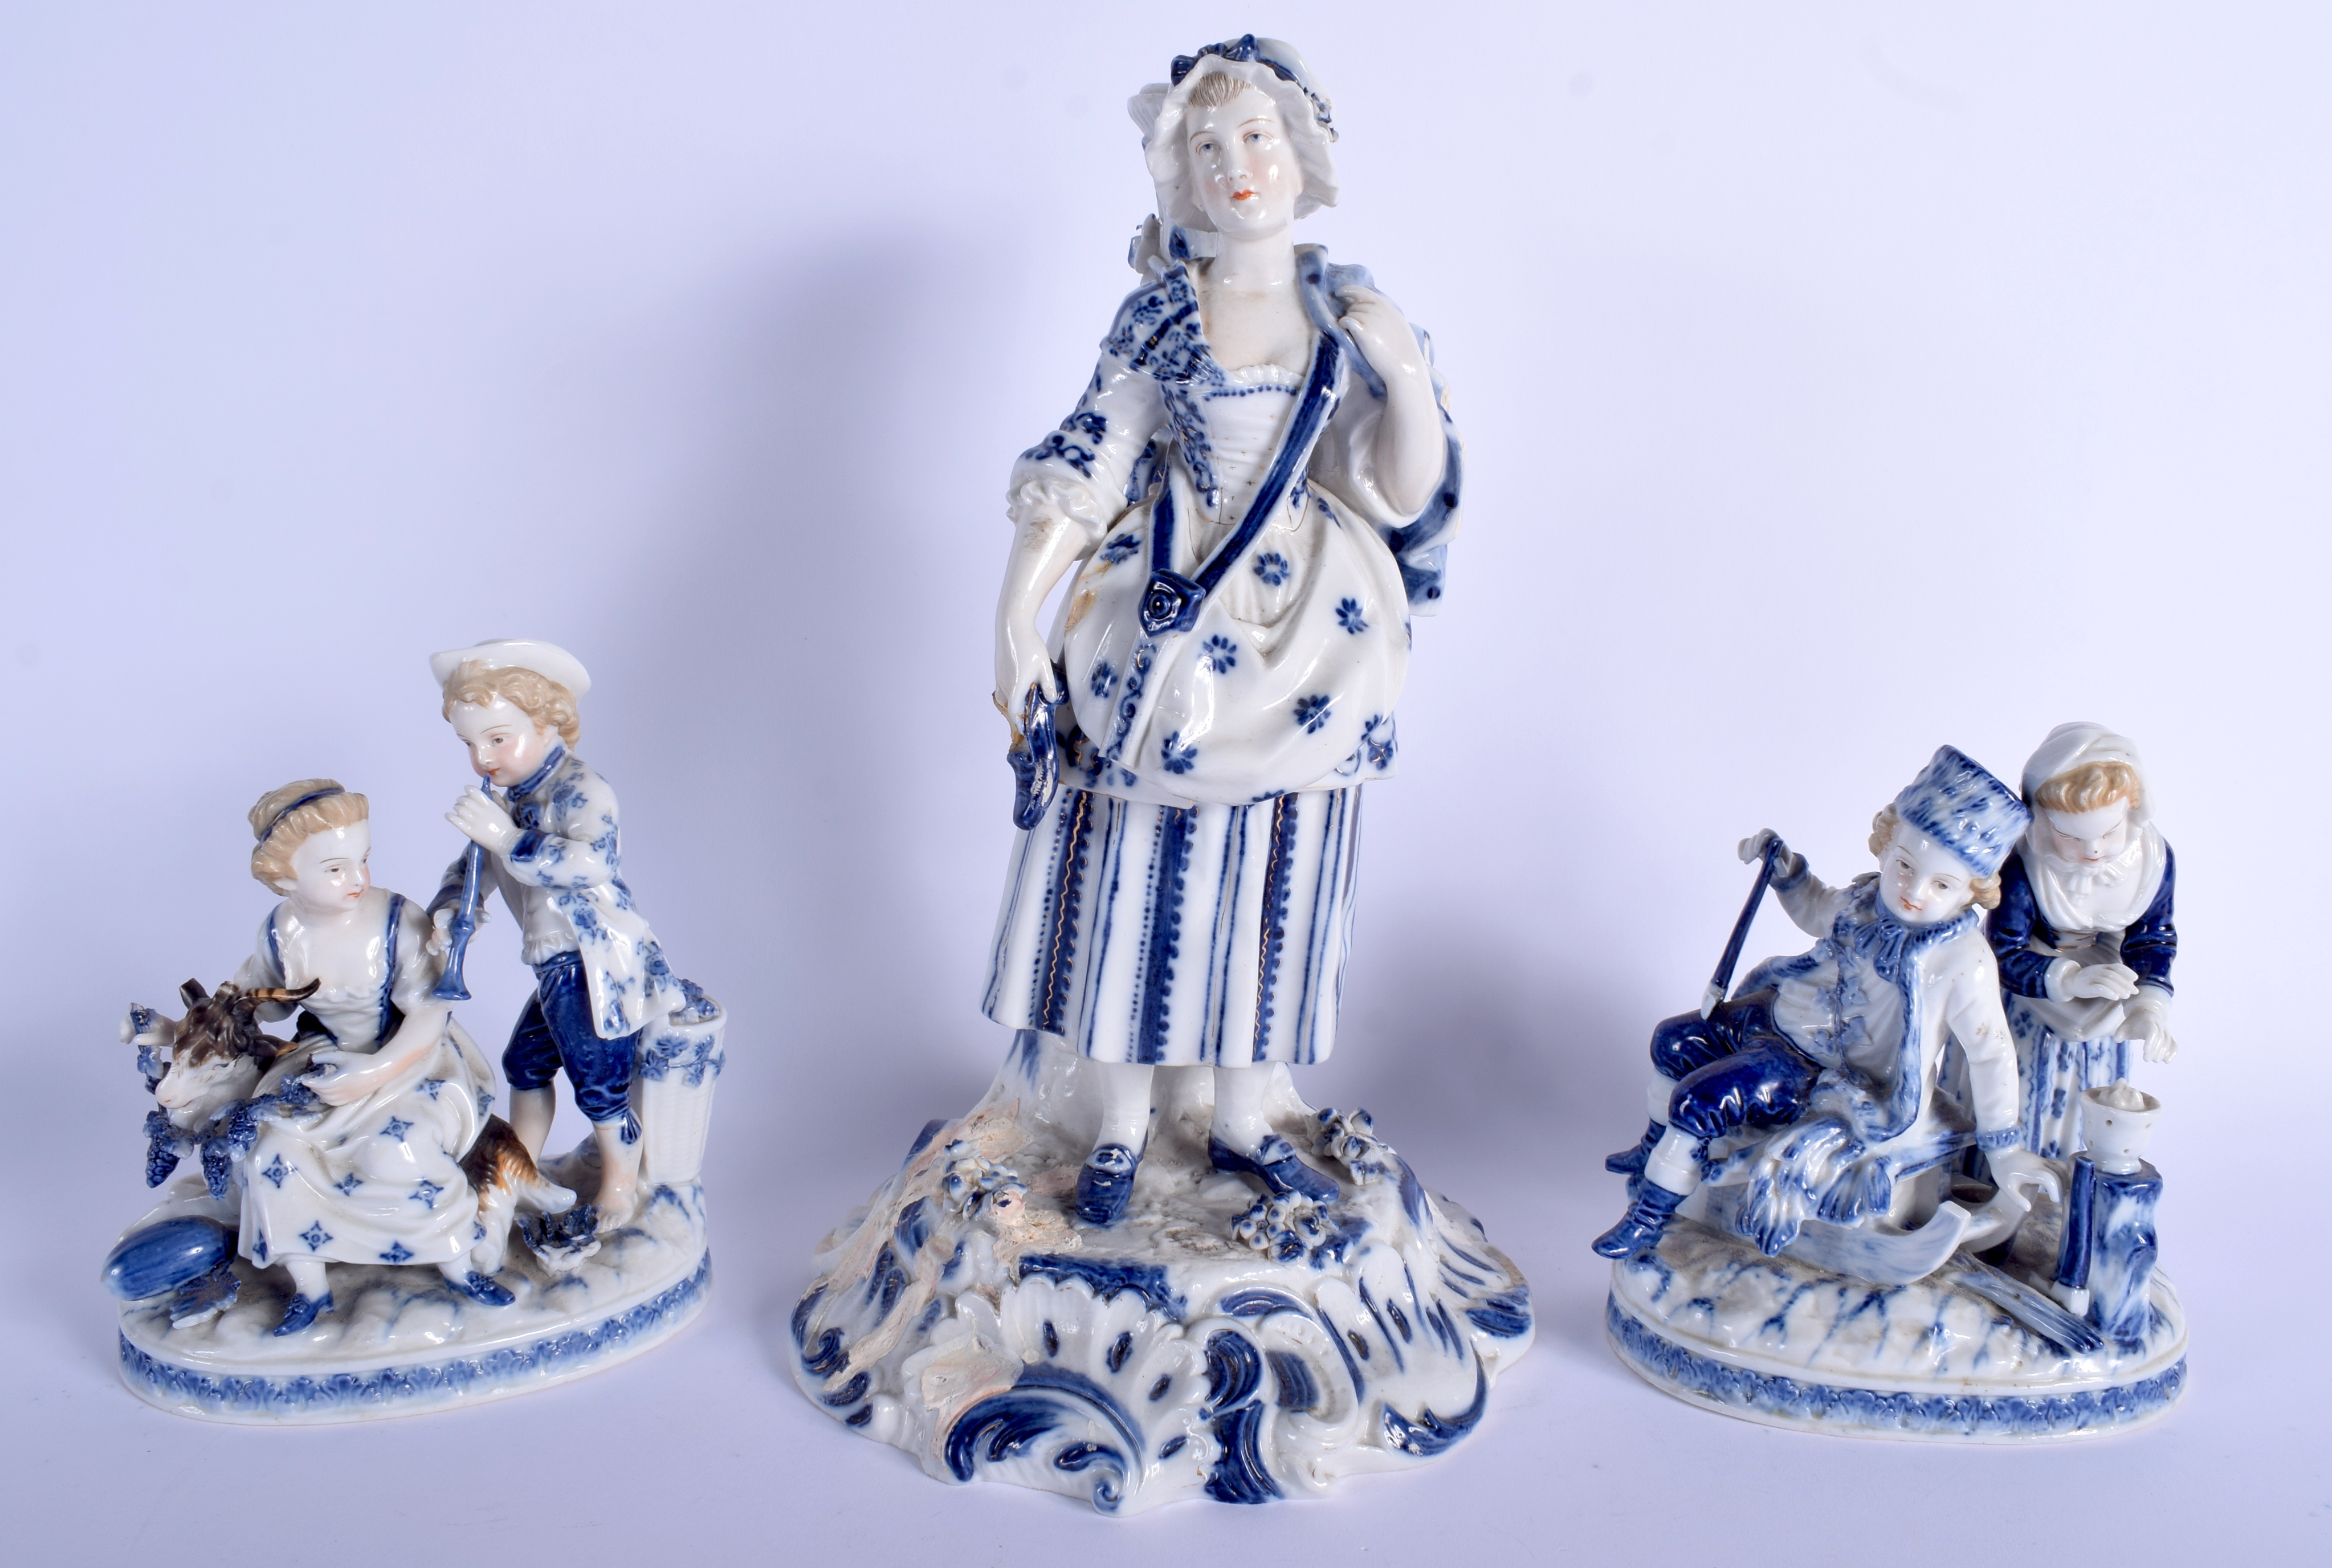 A PAIR OF 19TH CENTURY GERMAN AUGUSTUS REX PORCELAIN FIGURES together with a large matching figure.